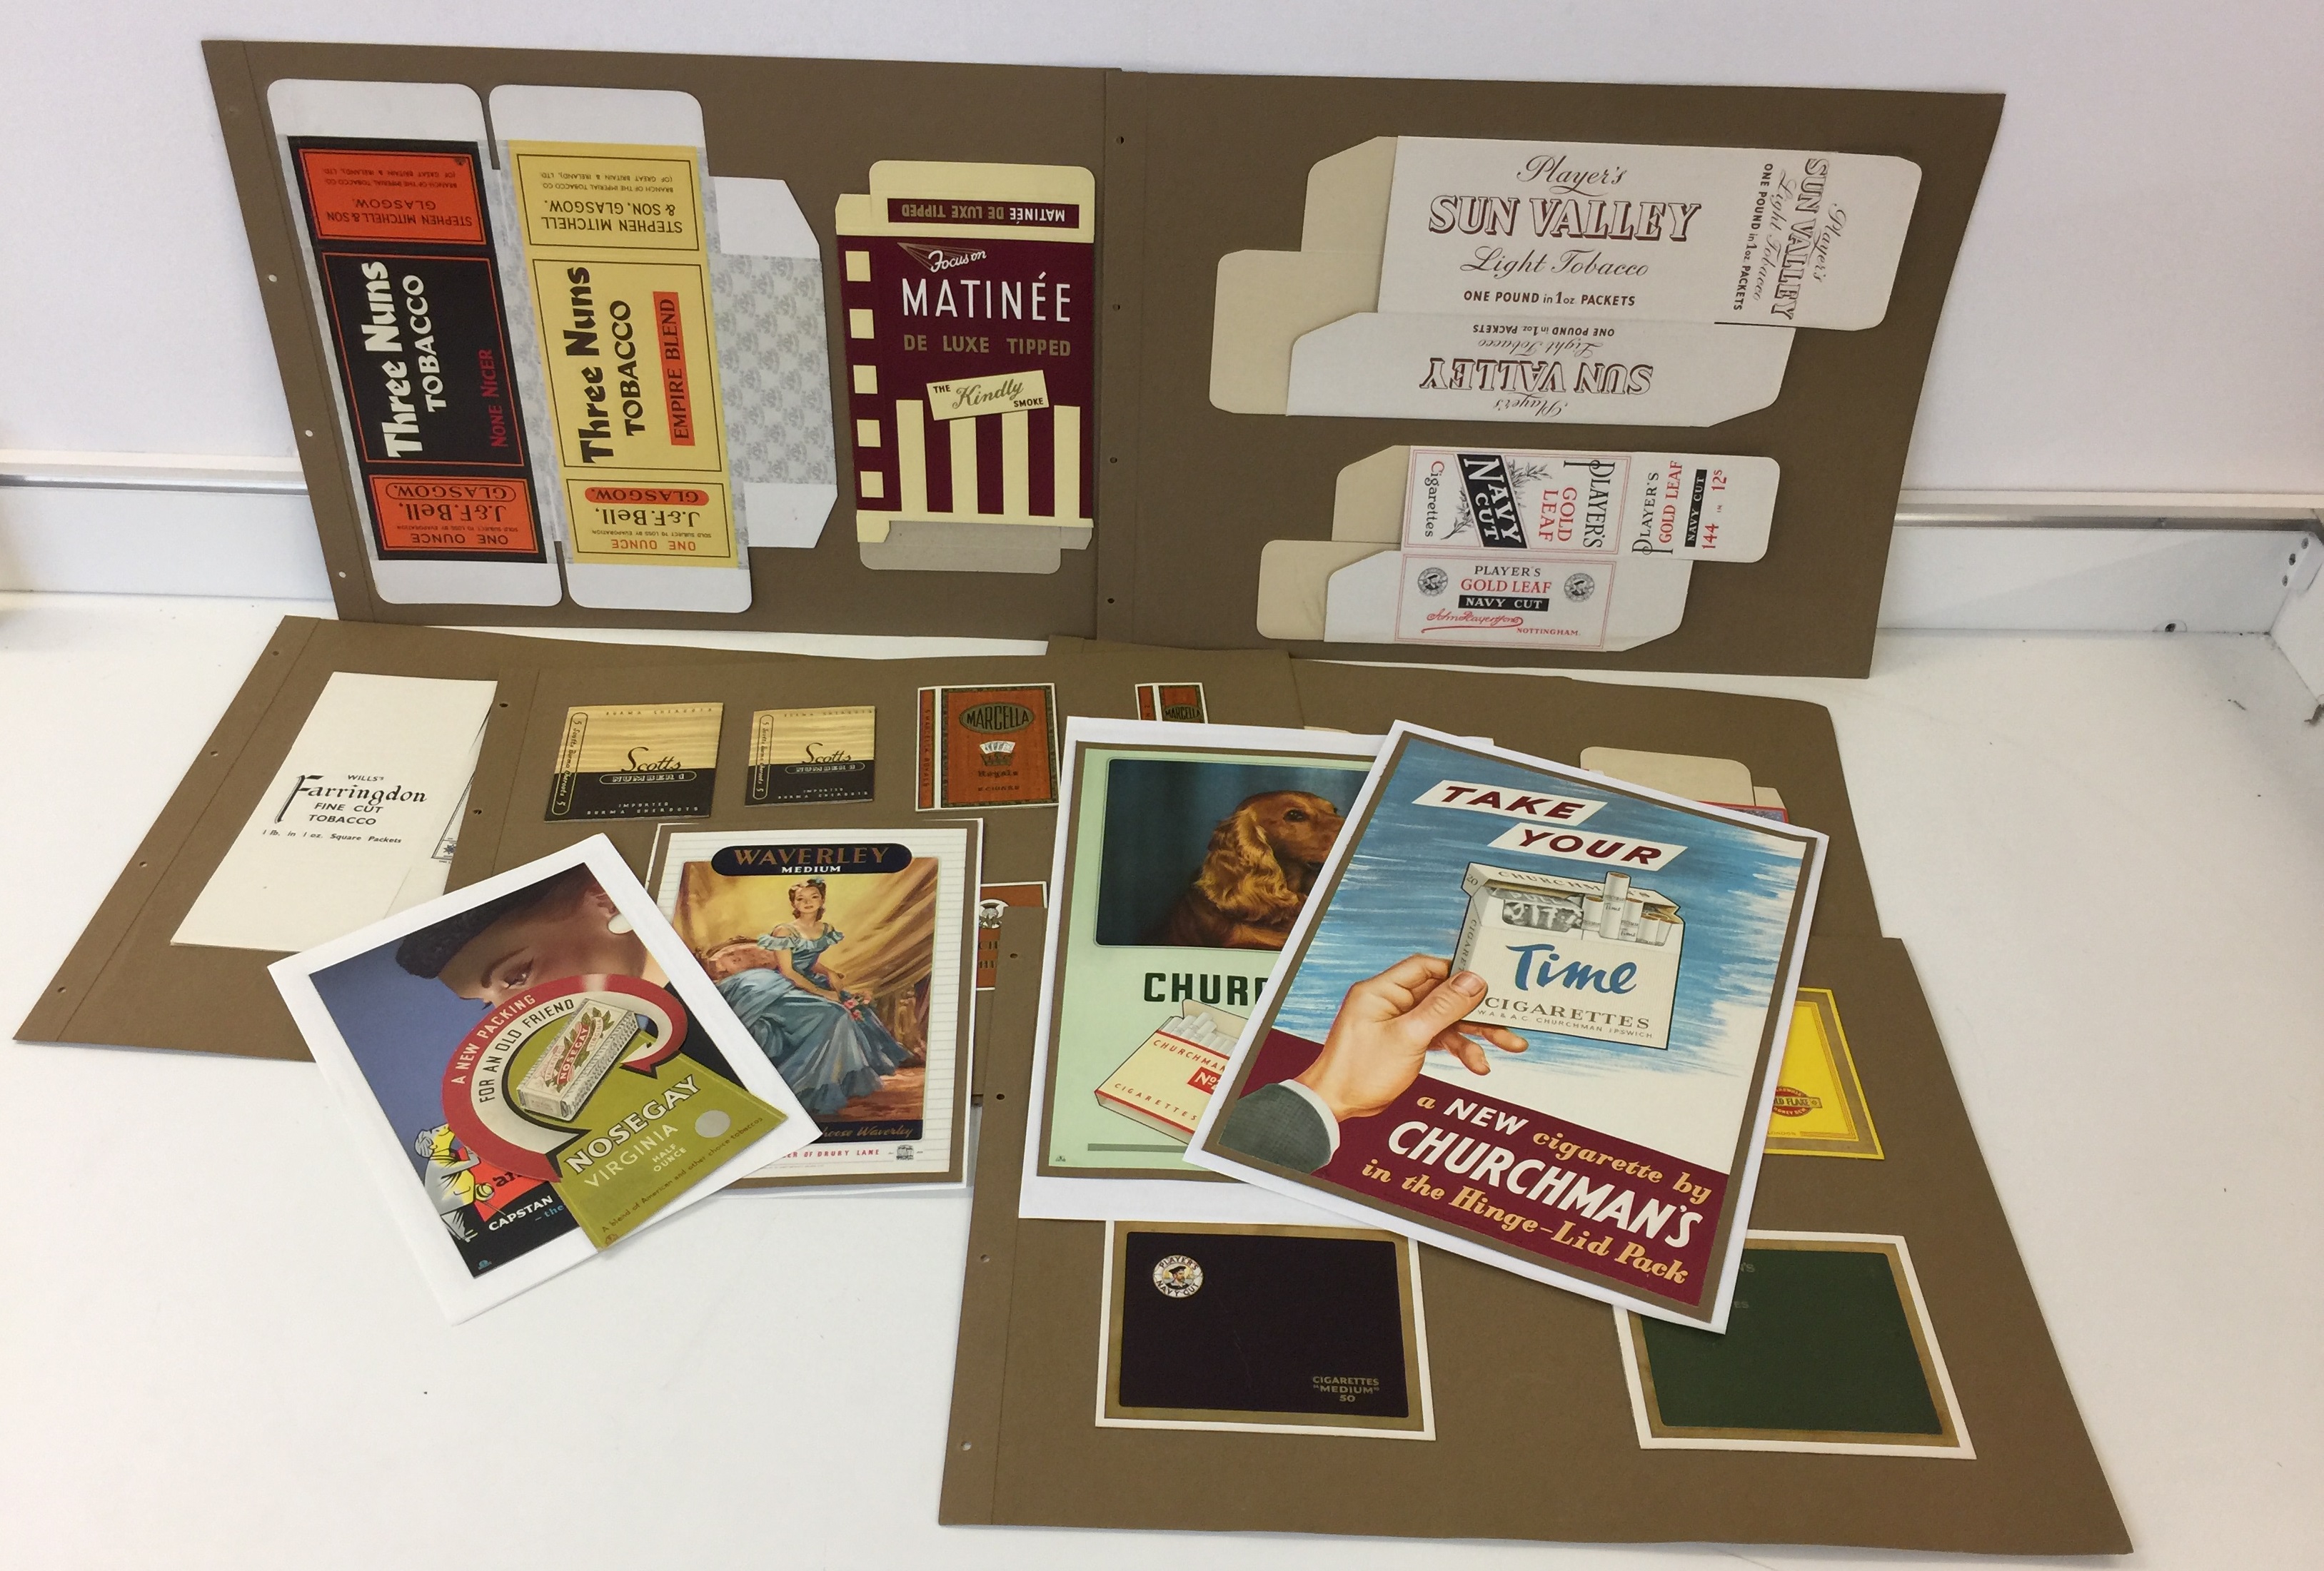 VINTAGE CIGARETTE ADVERTISING - Approx 4